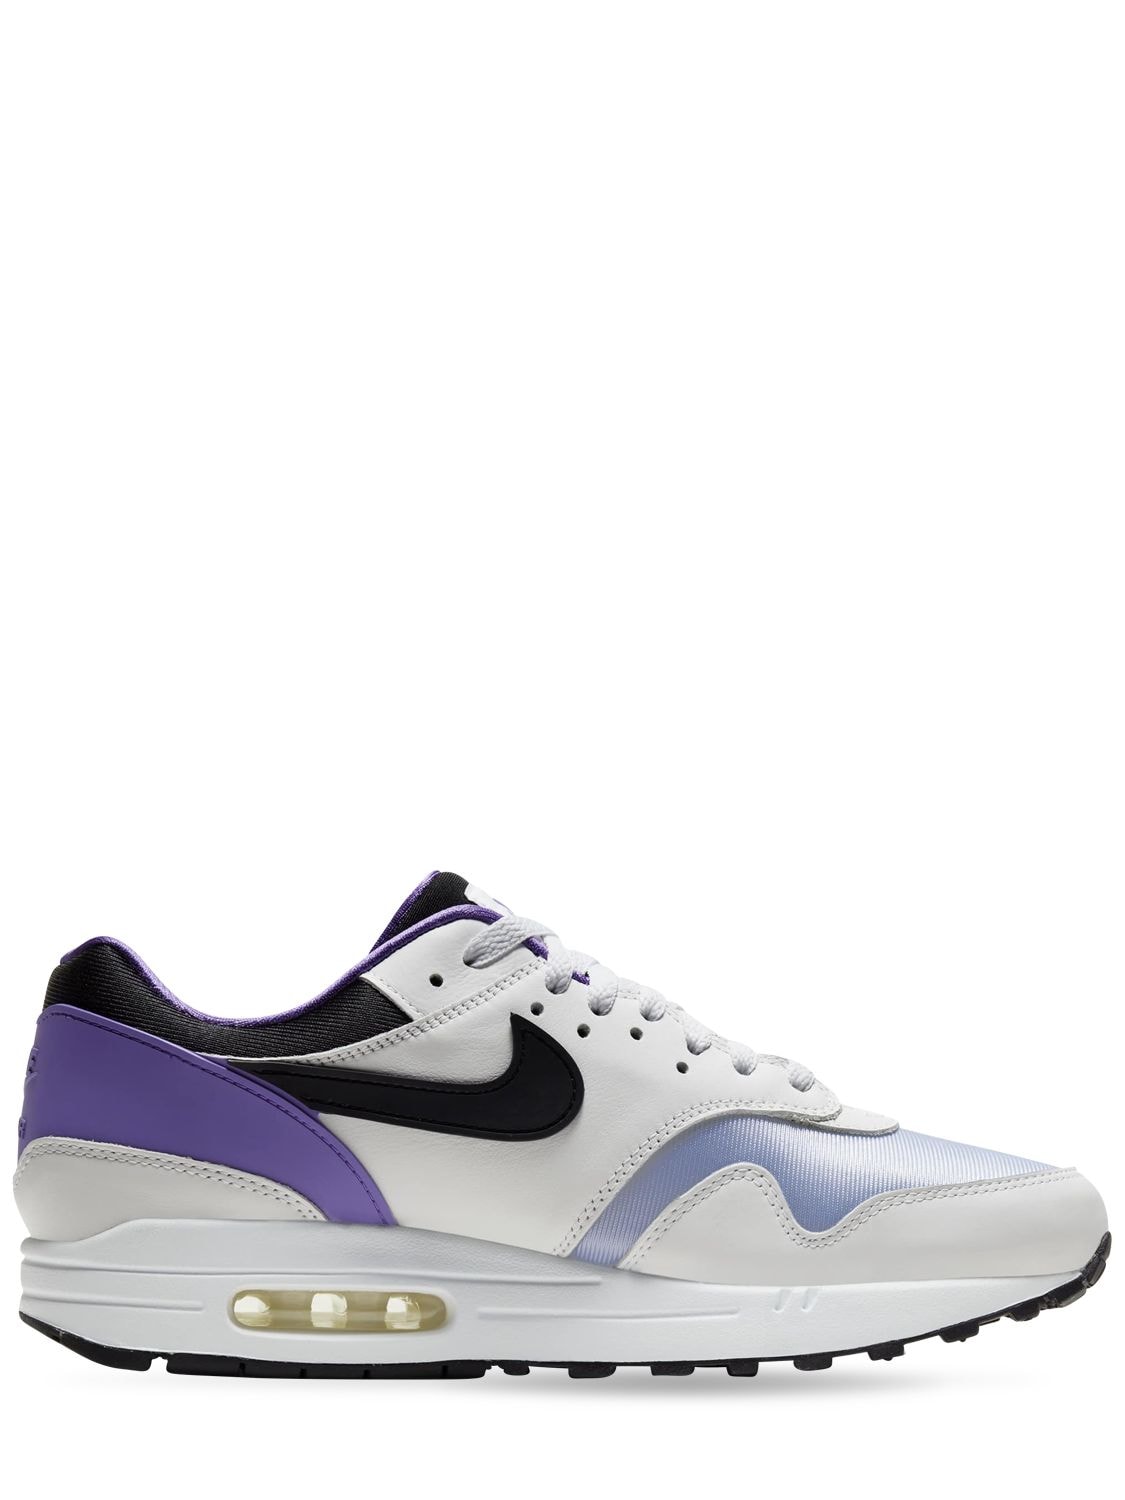 Nike “ Air Max 1 Dna”运动鞋 In White,purple Punch